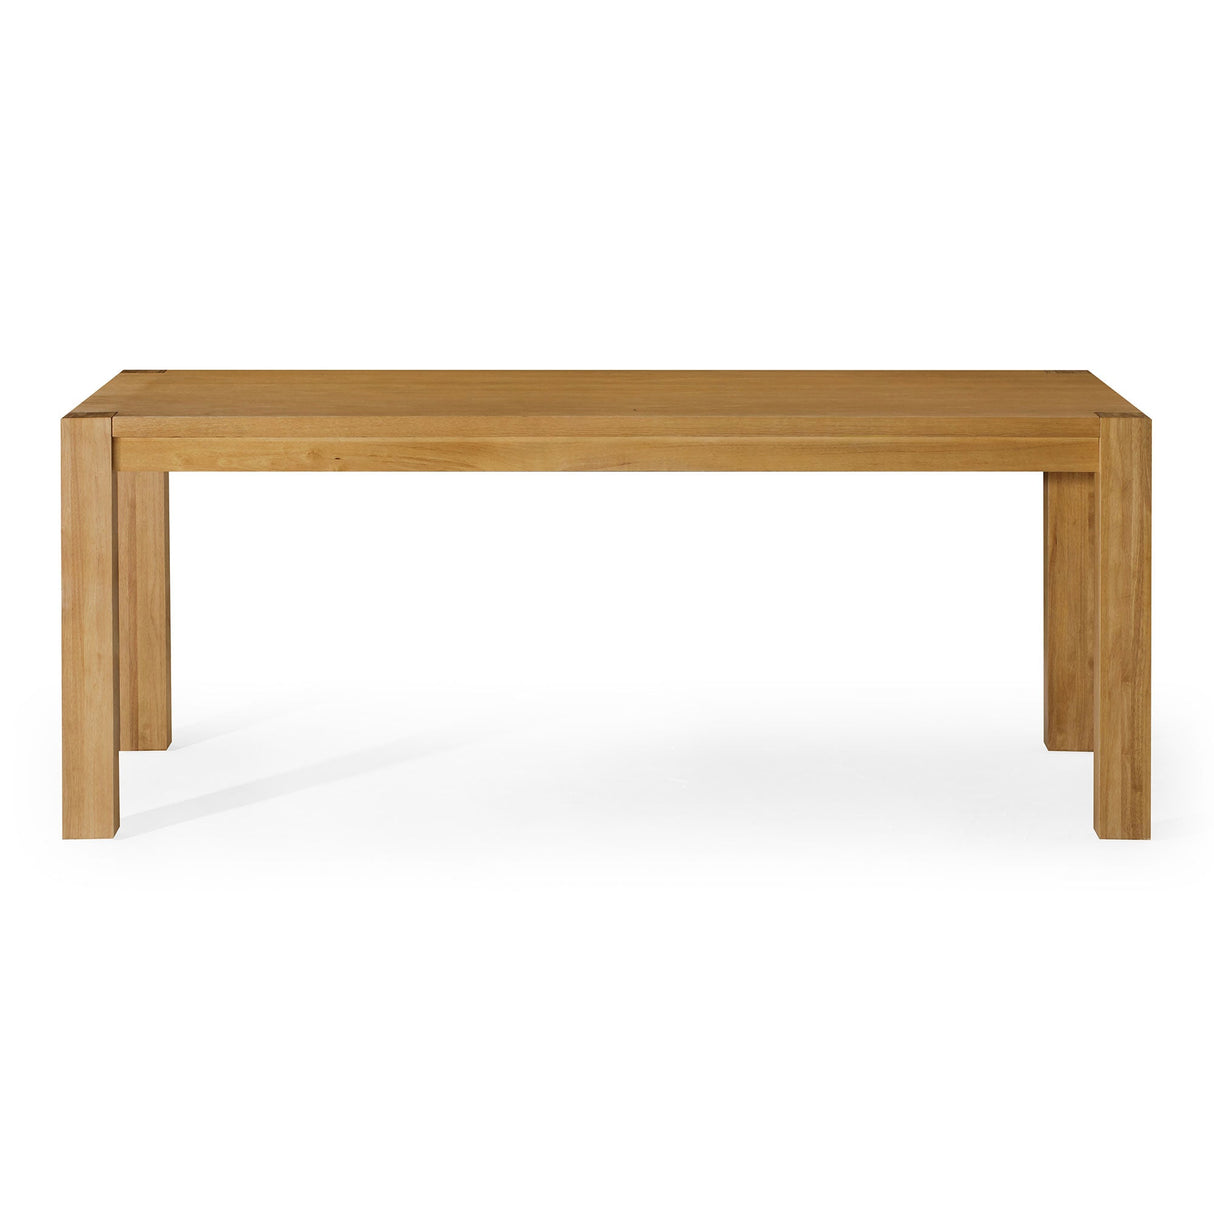 Maven Lane Cleo Contemporary Wooden Dining Table in Refined Natural Finish